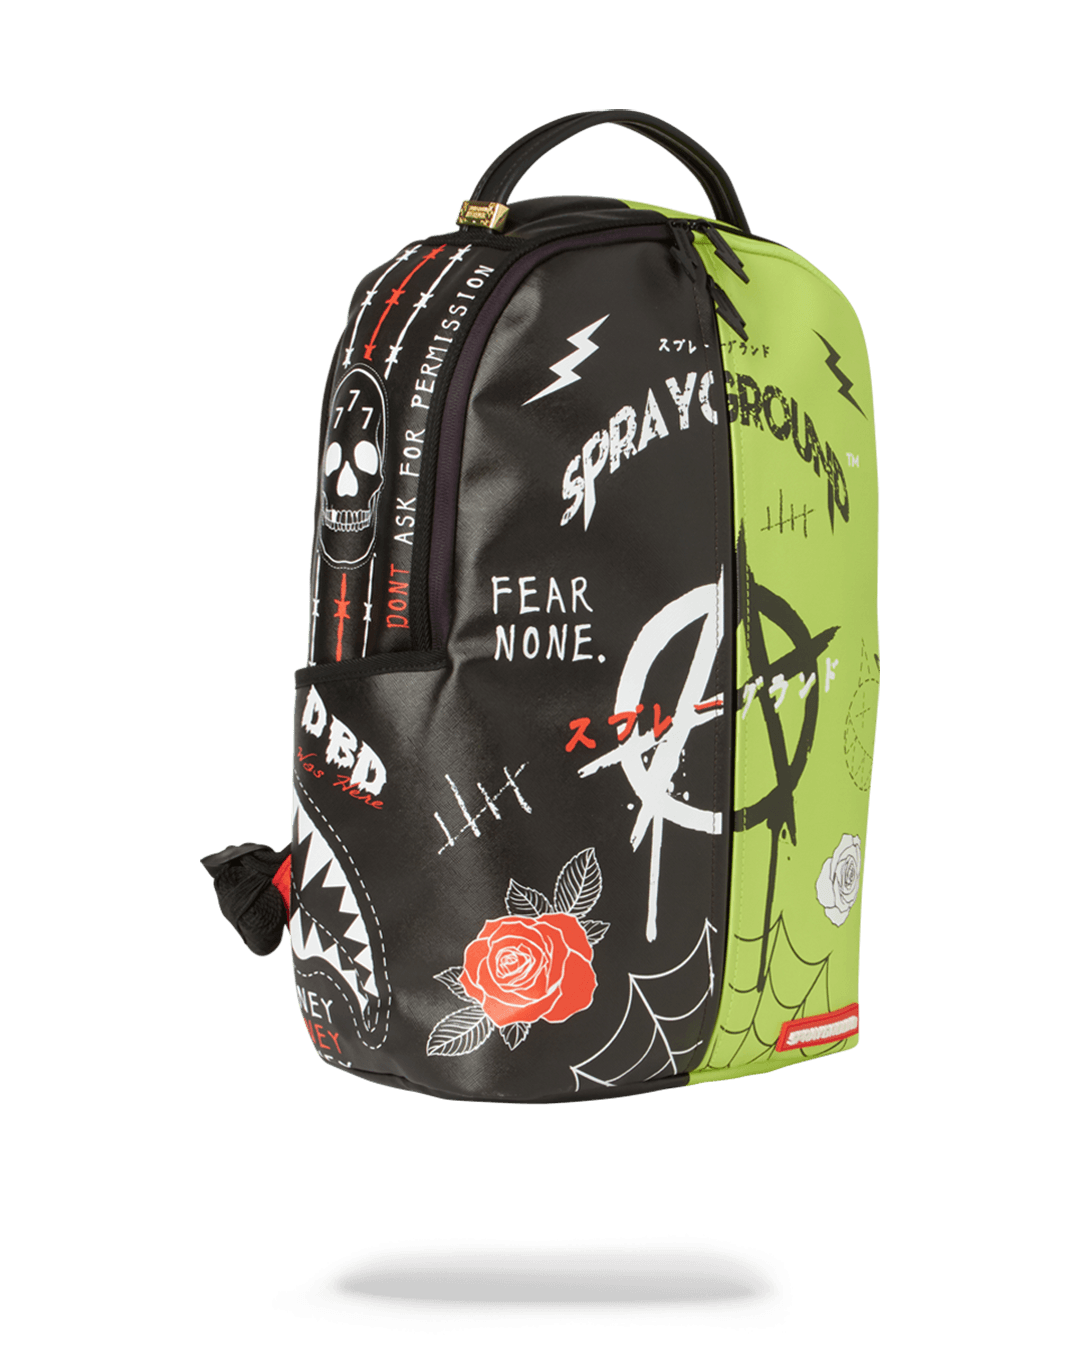 Extraordinary Discount | Party Time Backpack Sprayground Sale Sale At 60%